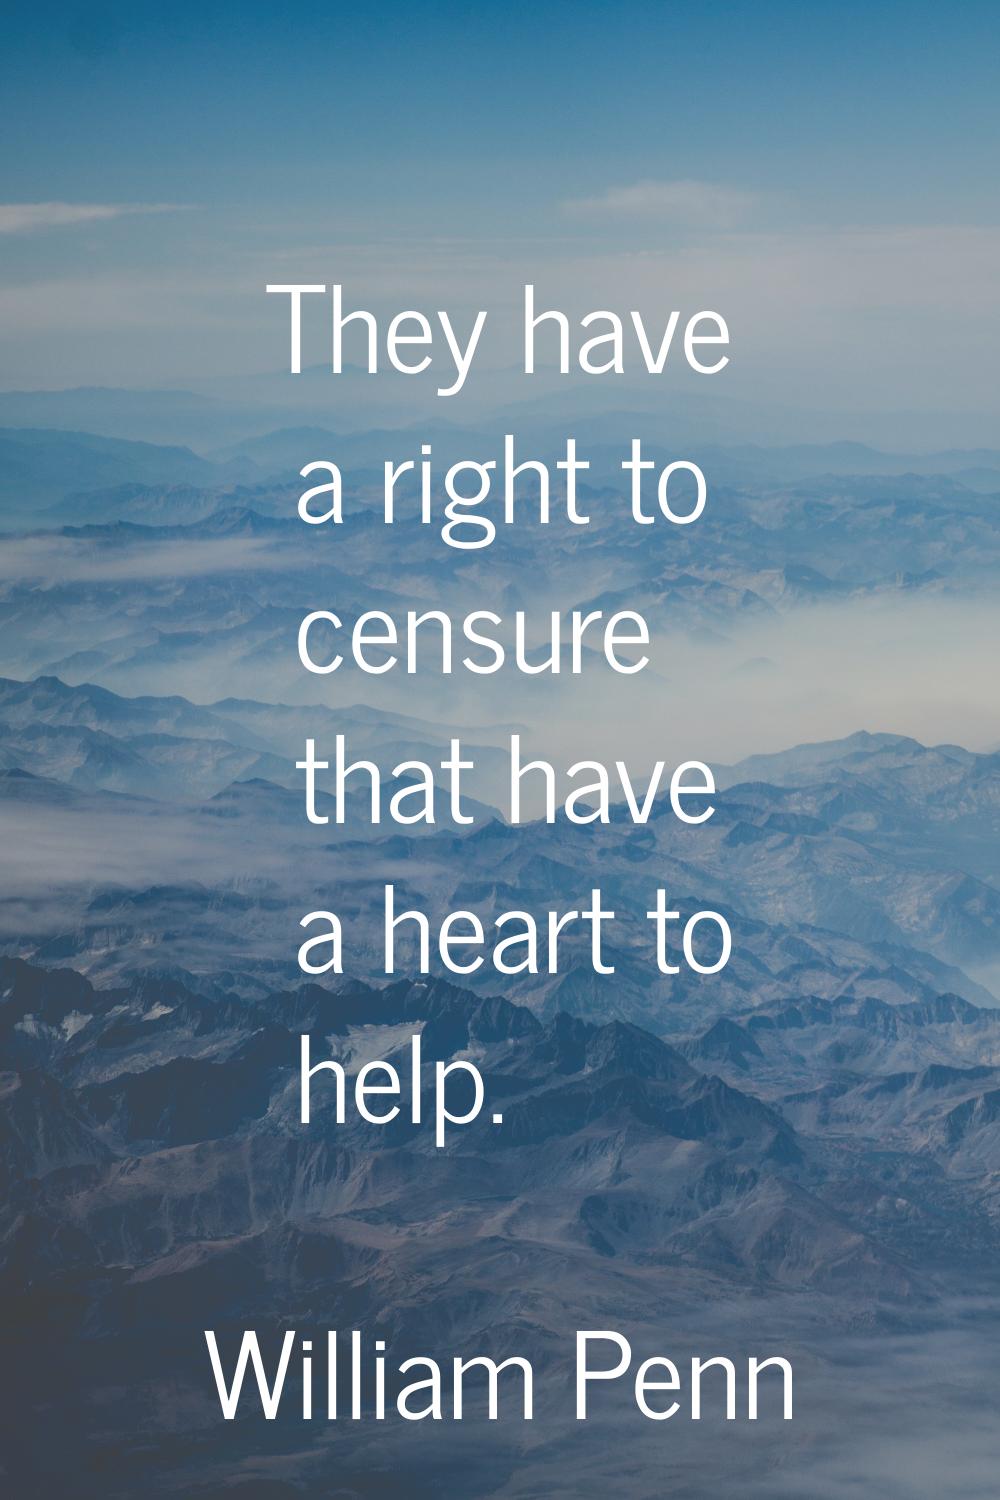 They have a right to censure that have a heart to help.